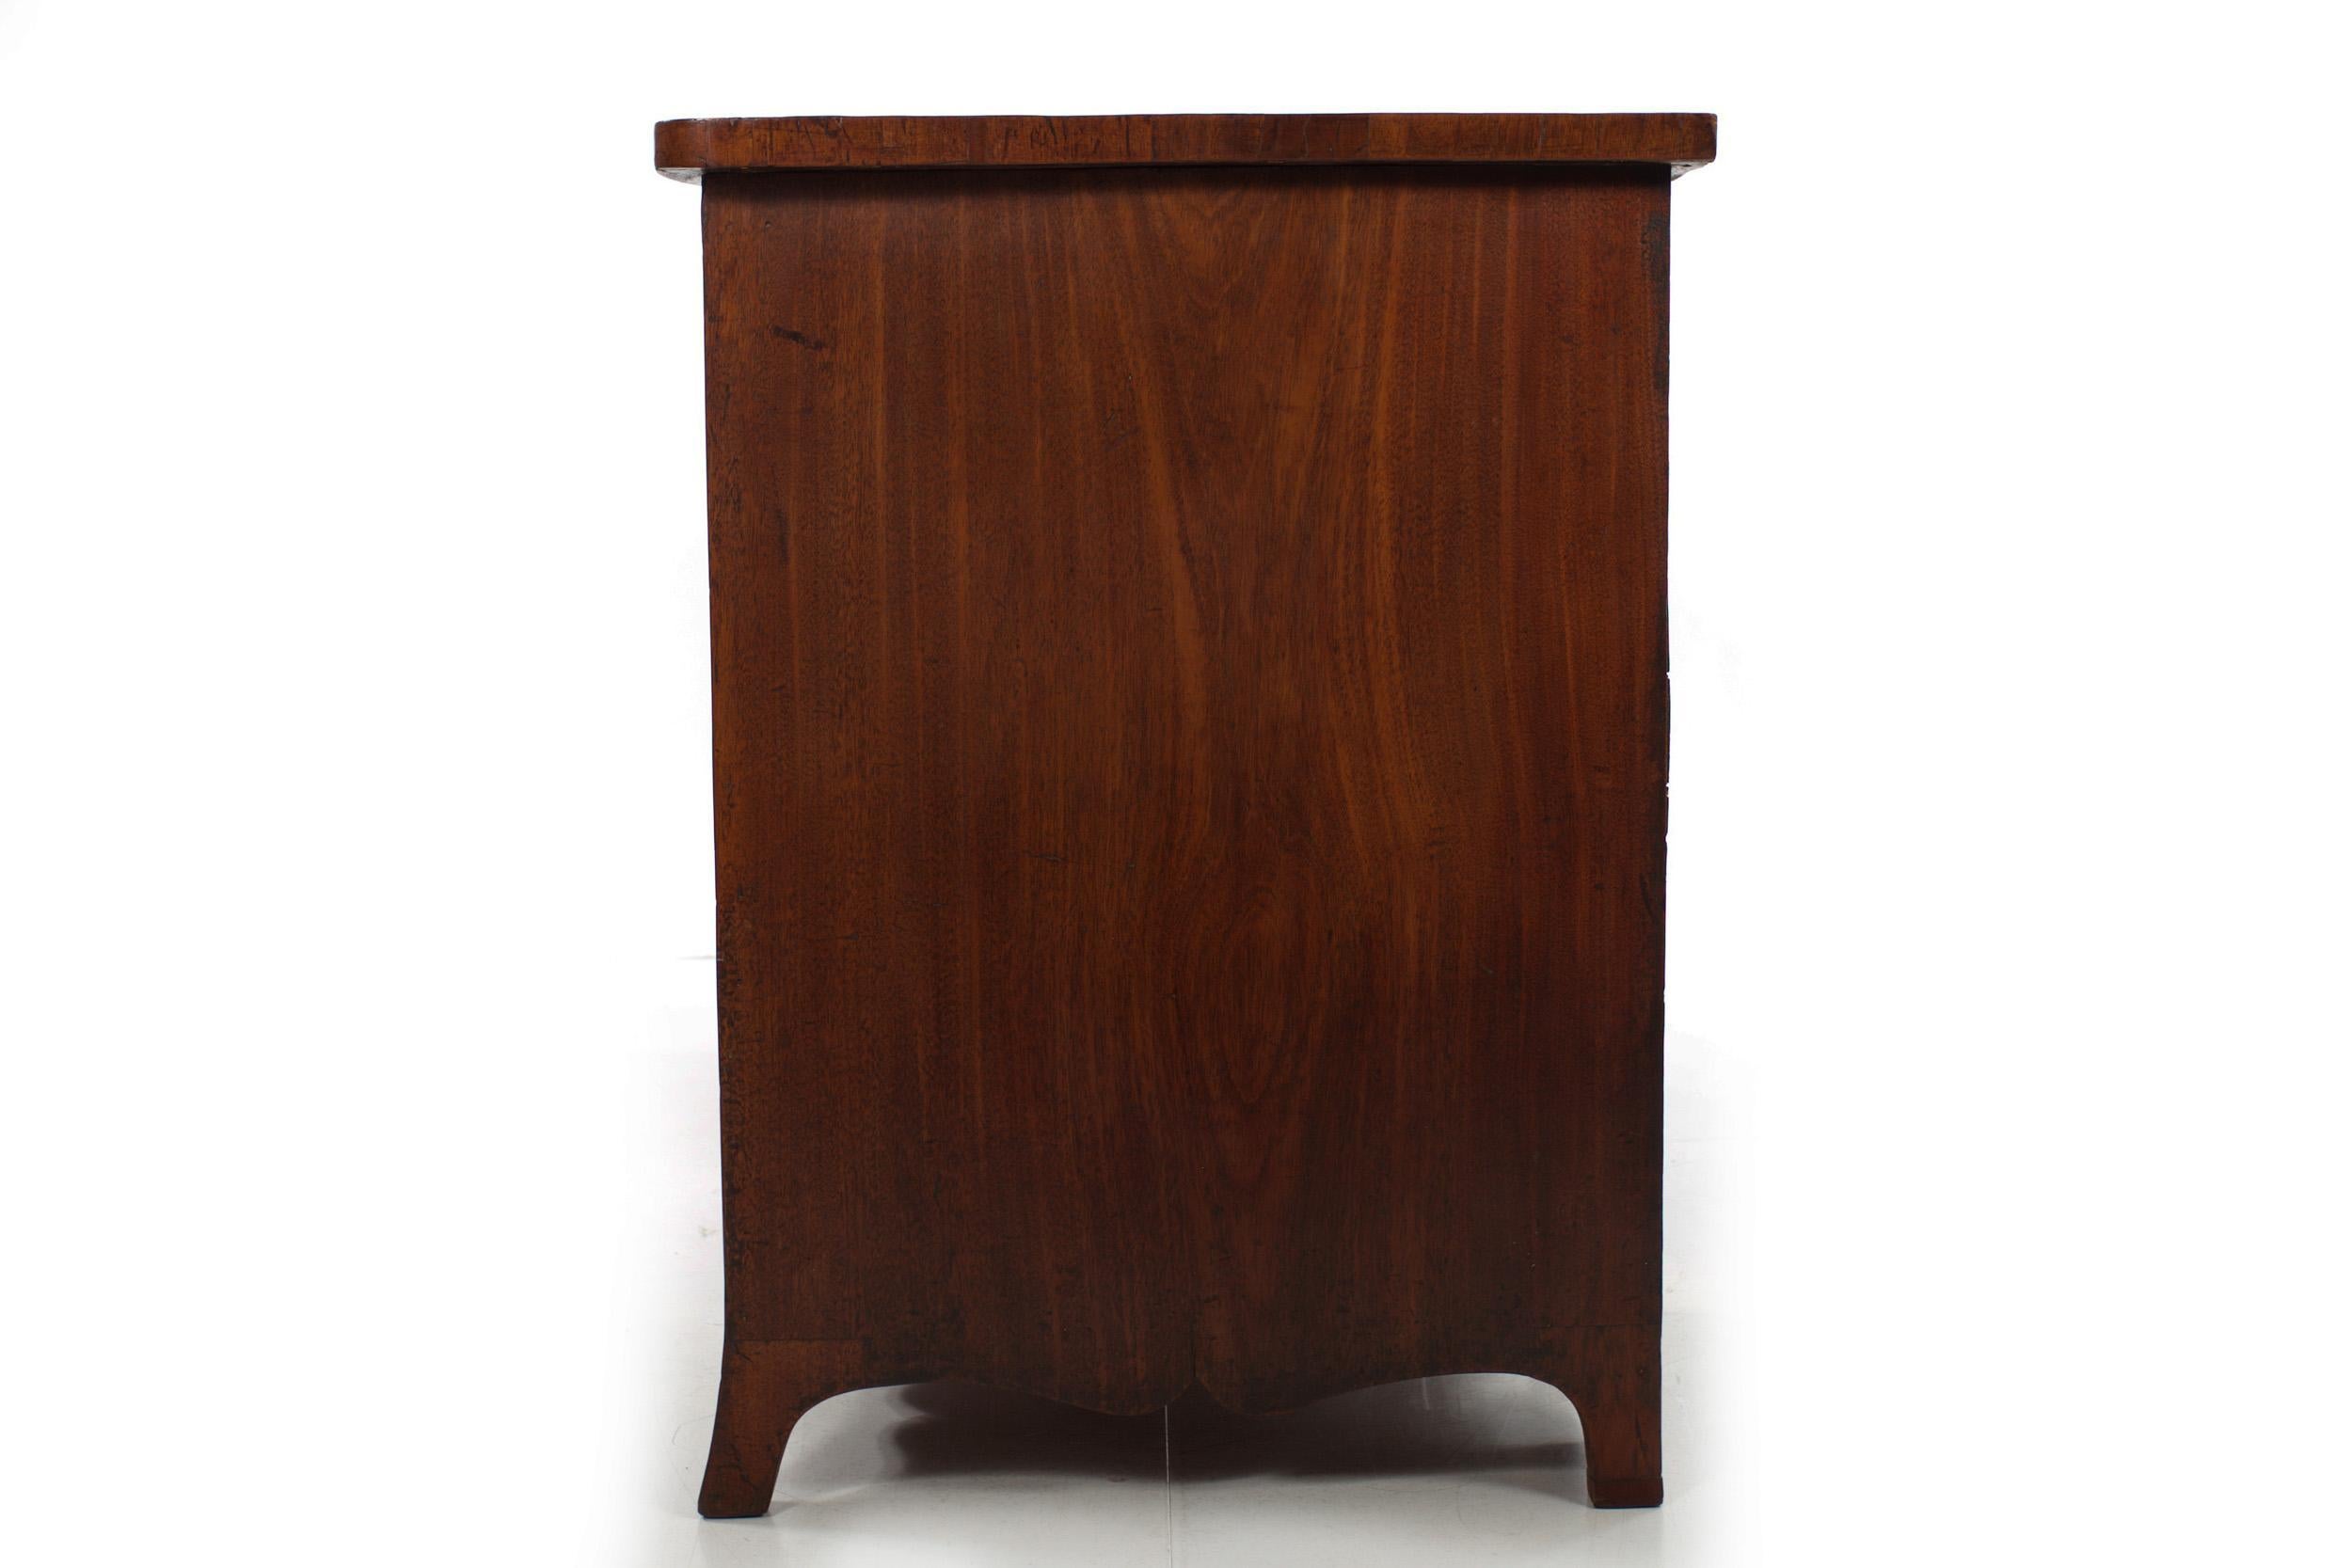 GEORGE III MAHOGANY SERPENTINE PEDESTAL SIDEBOARD
England, circa last quarter of the 18th-century
Item # 906BNS05L

An unusual and most attractive pedestal sideboard from the George III period, this piece presents beautifully with a glowing ancient